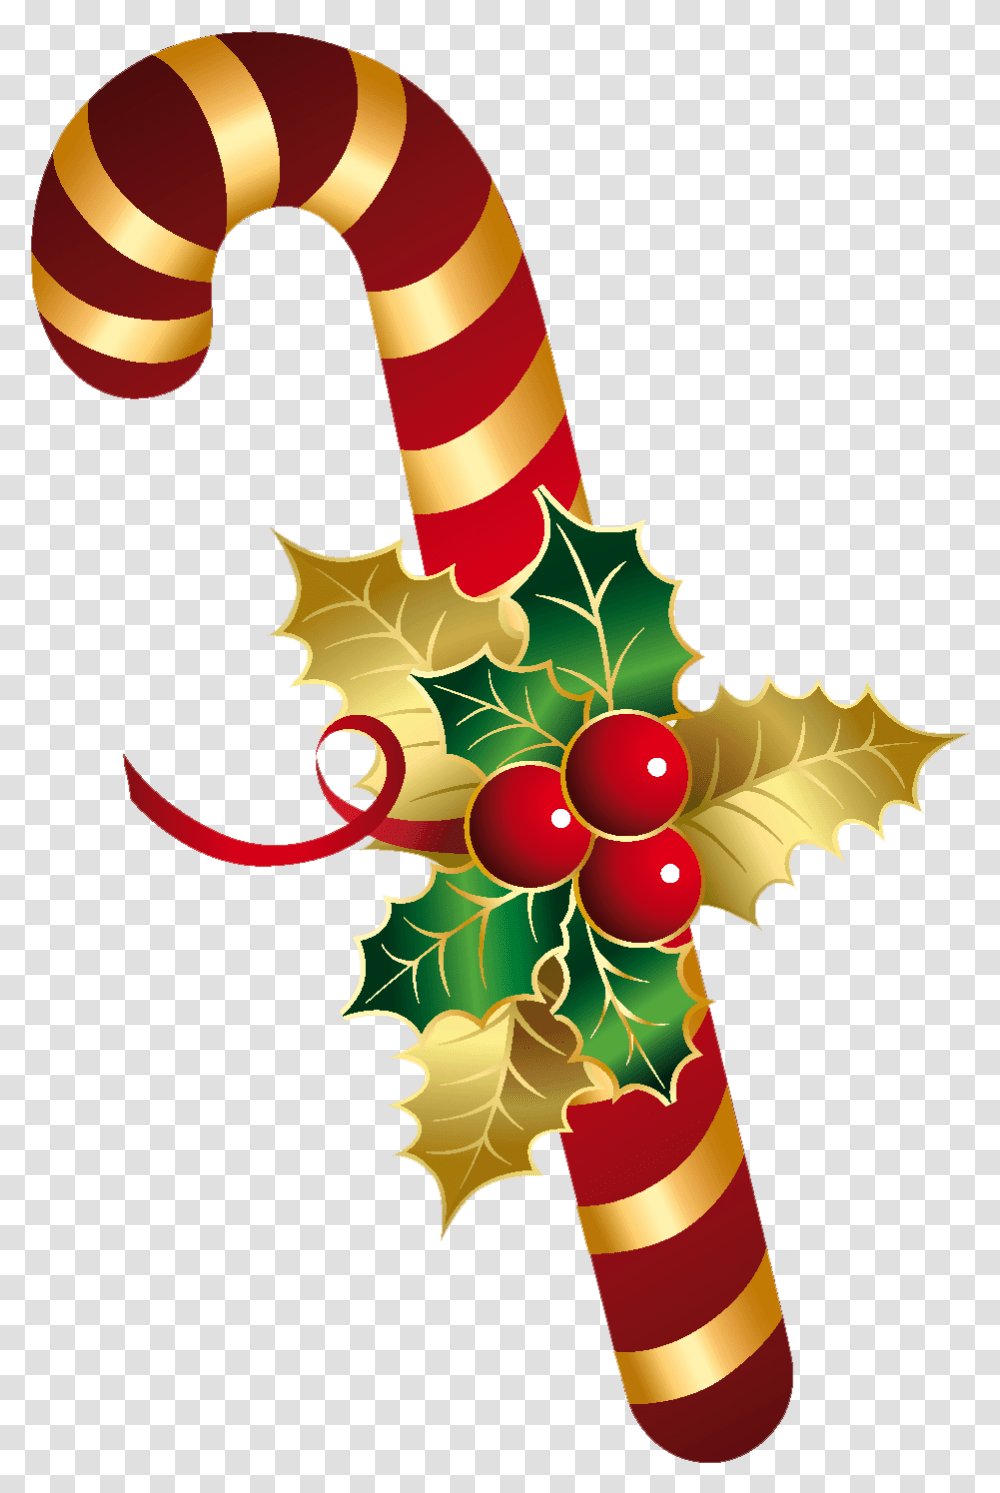 Candy Caneclipart Christmas Candy Cane Clipart, Plant, Tree, Leaf Transparent Png